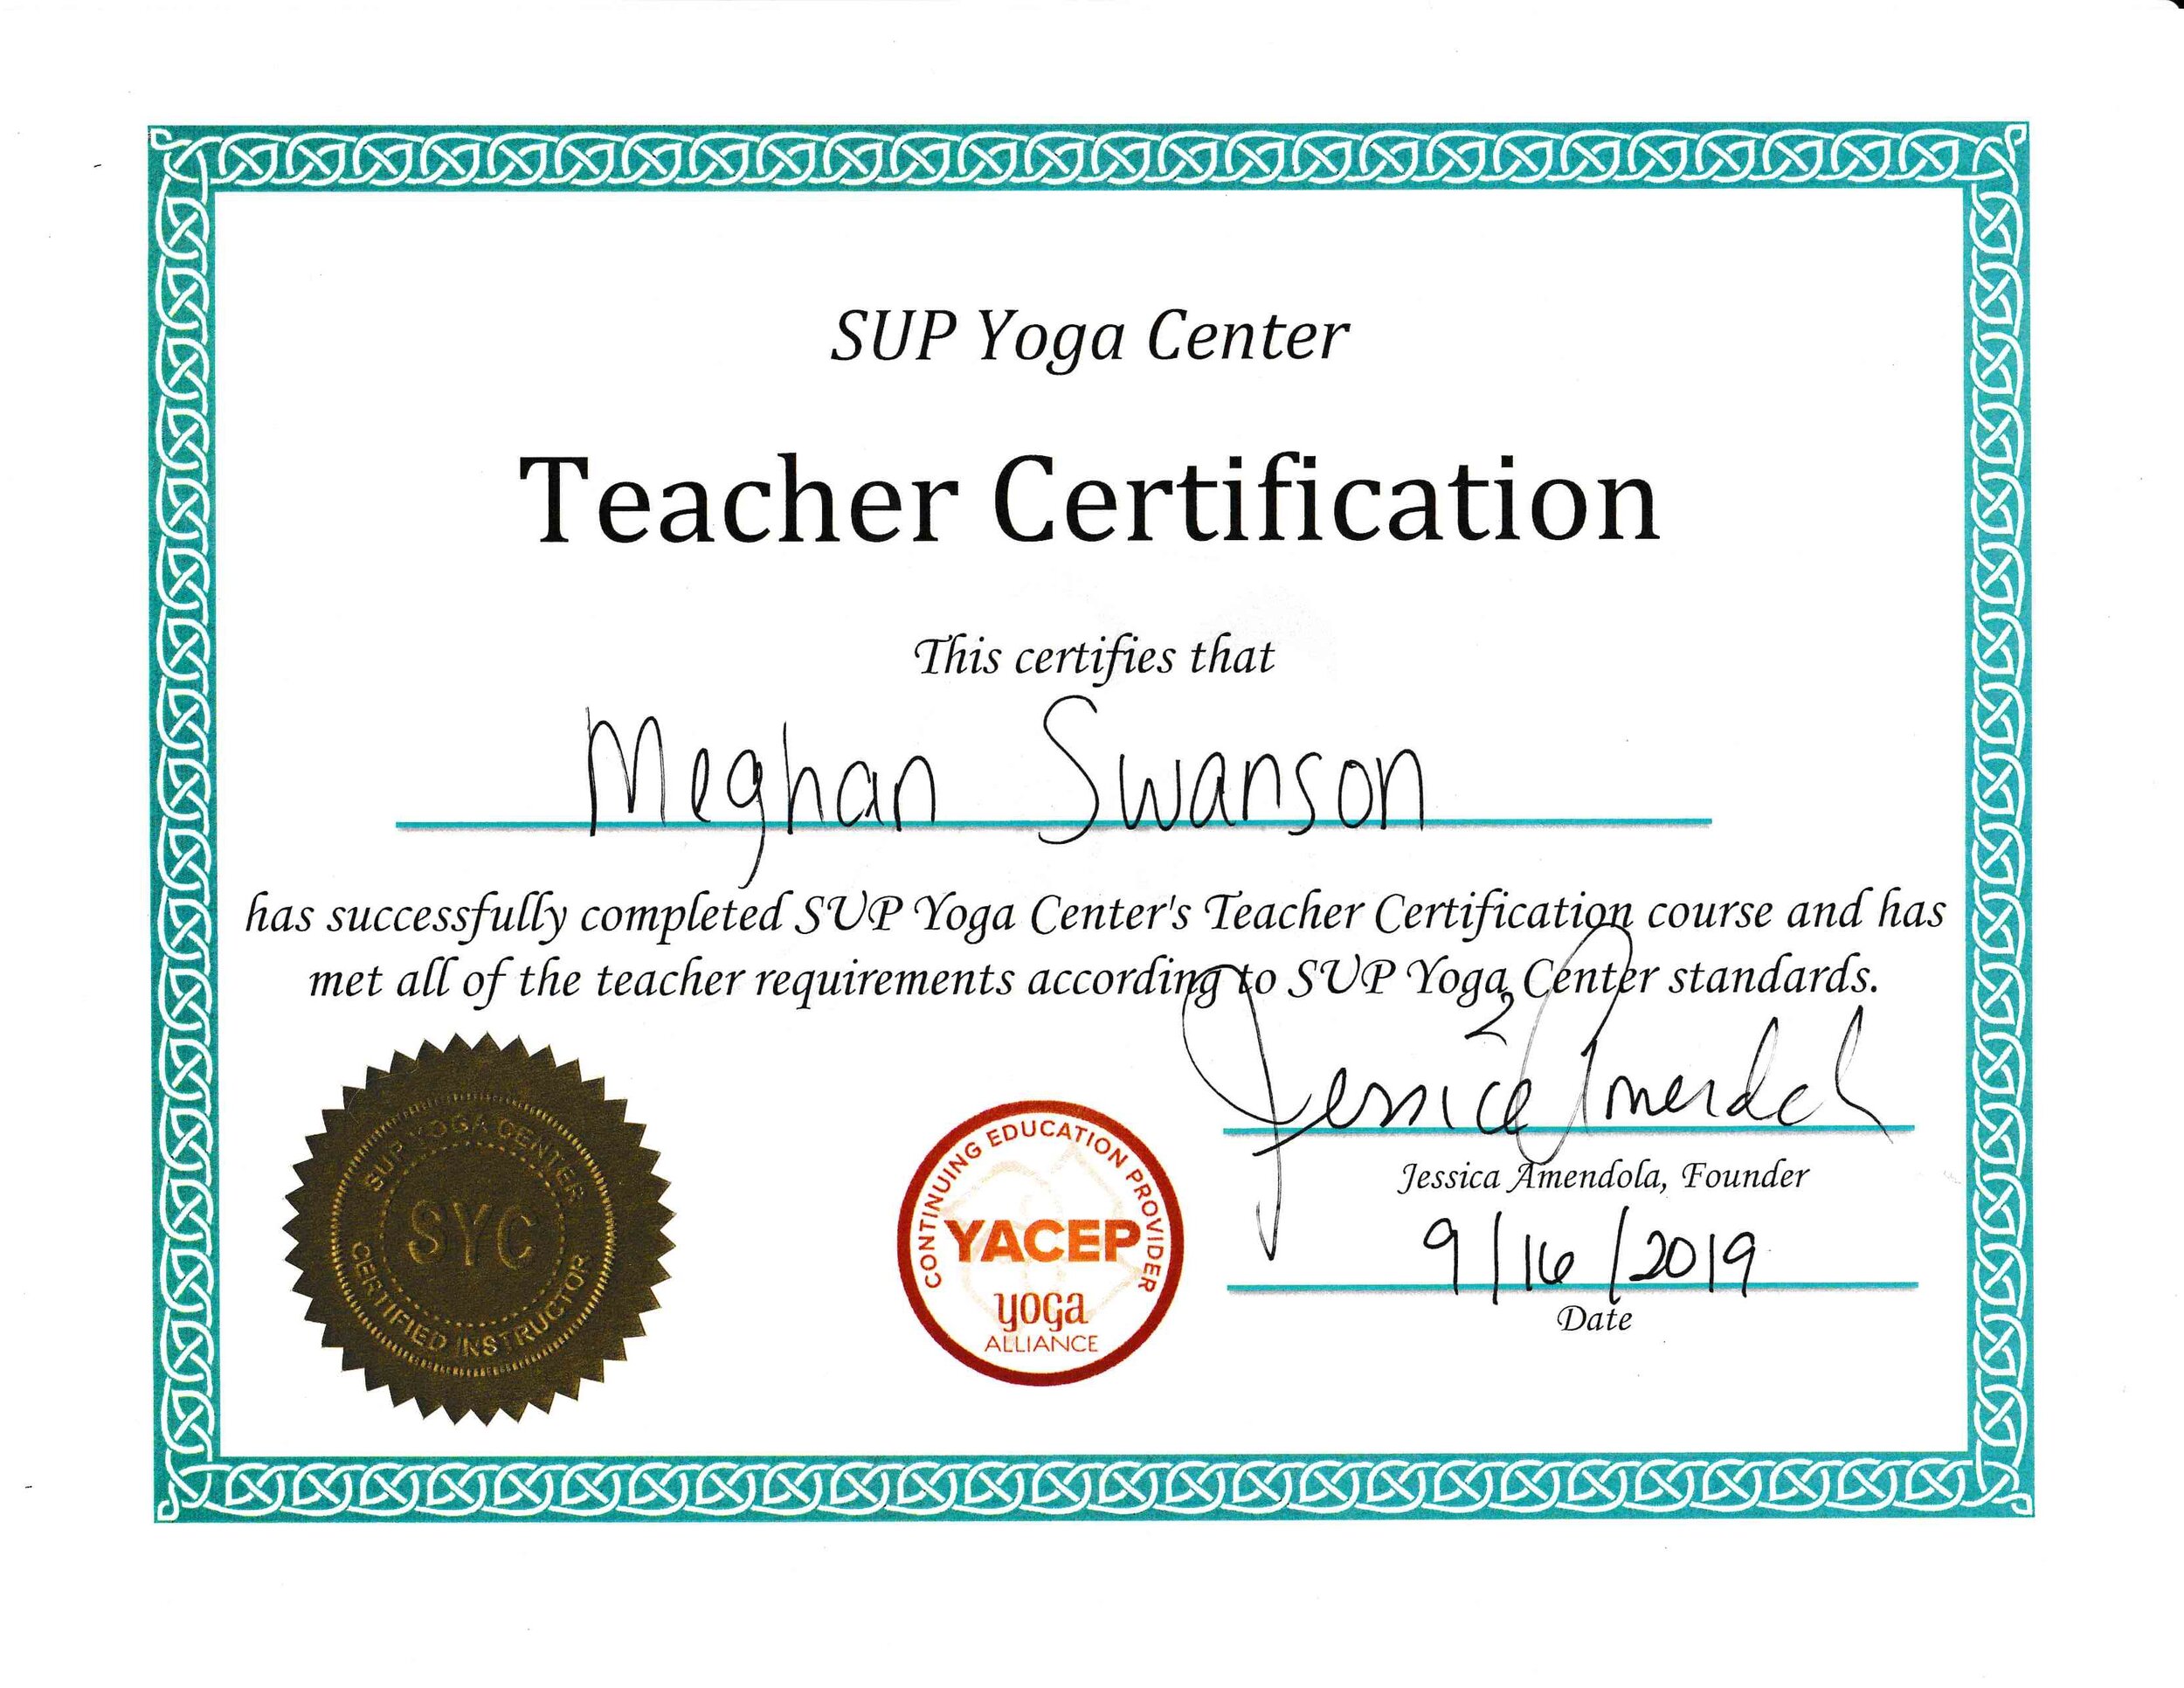 Meghan Swanson- Certified SUP Yoga Instructor Miami (Copy)